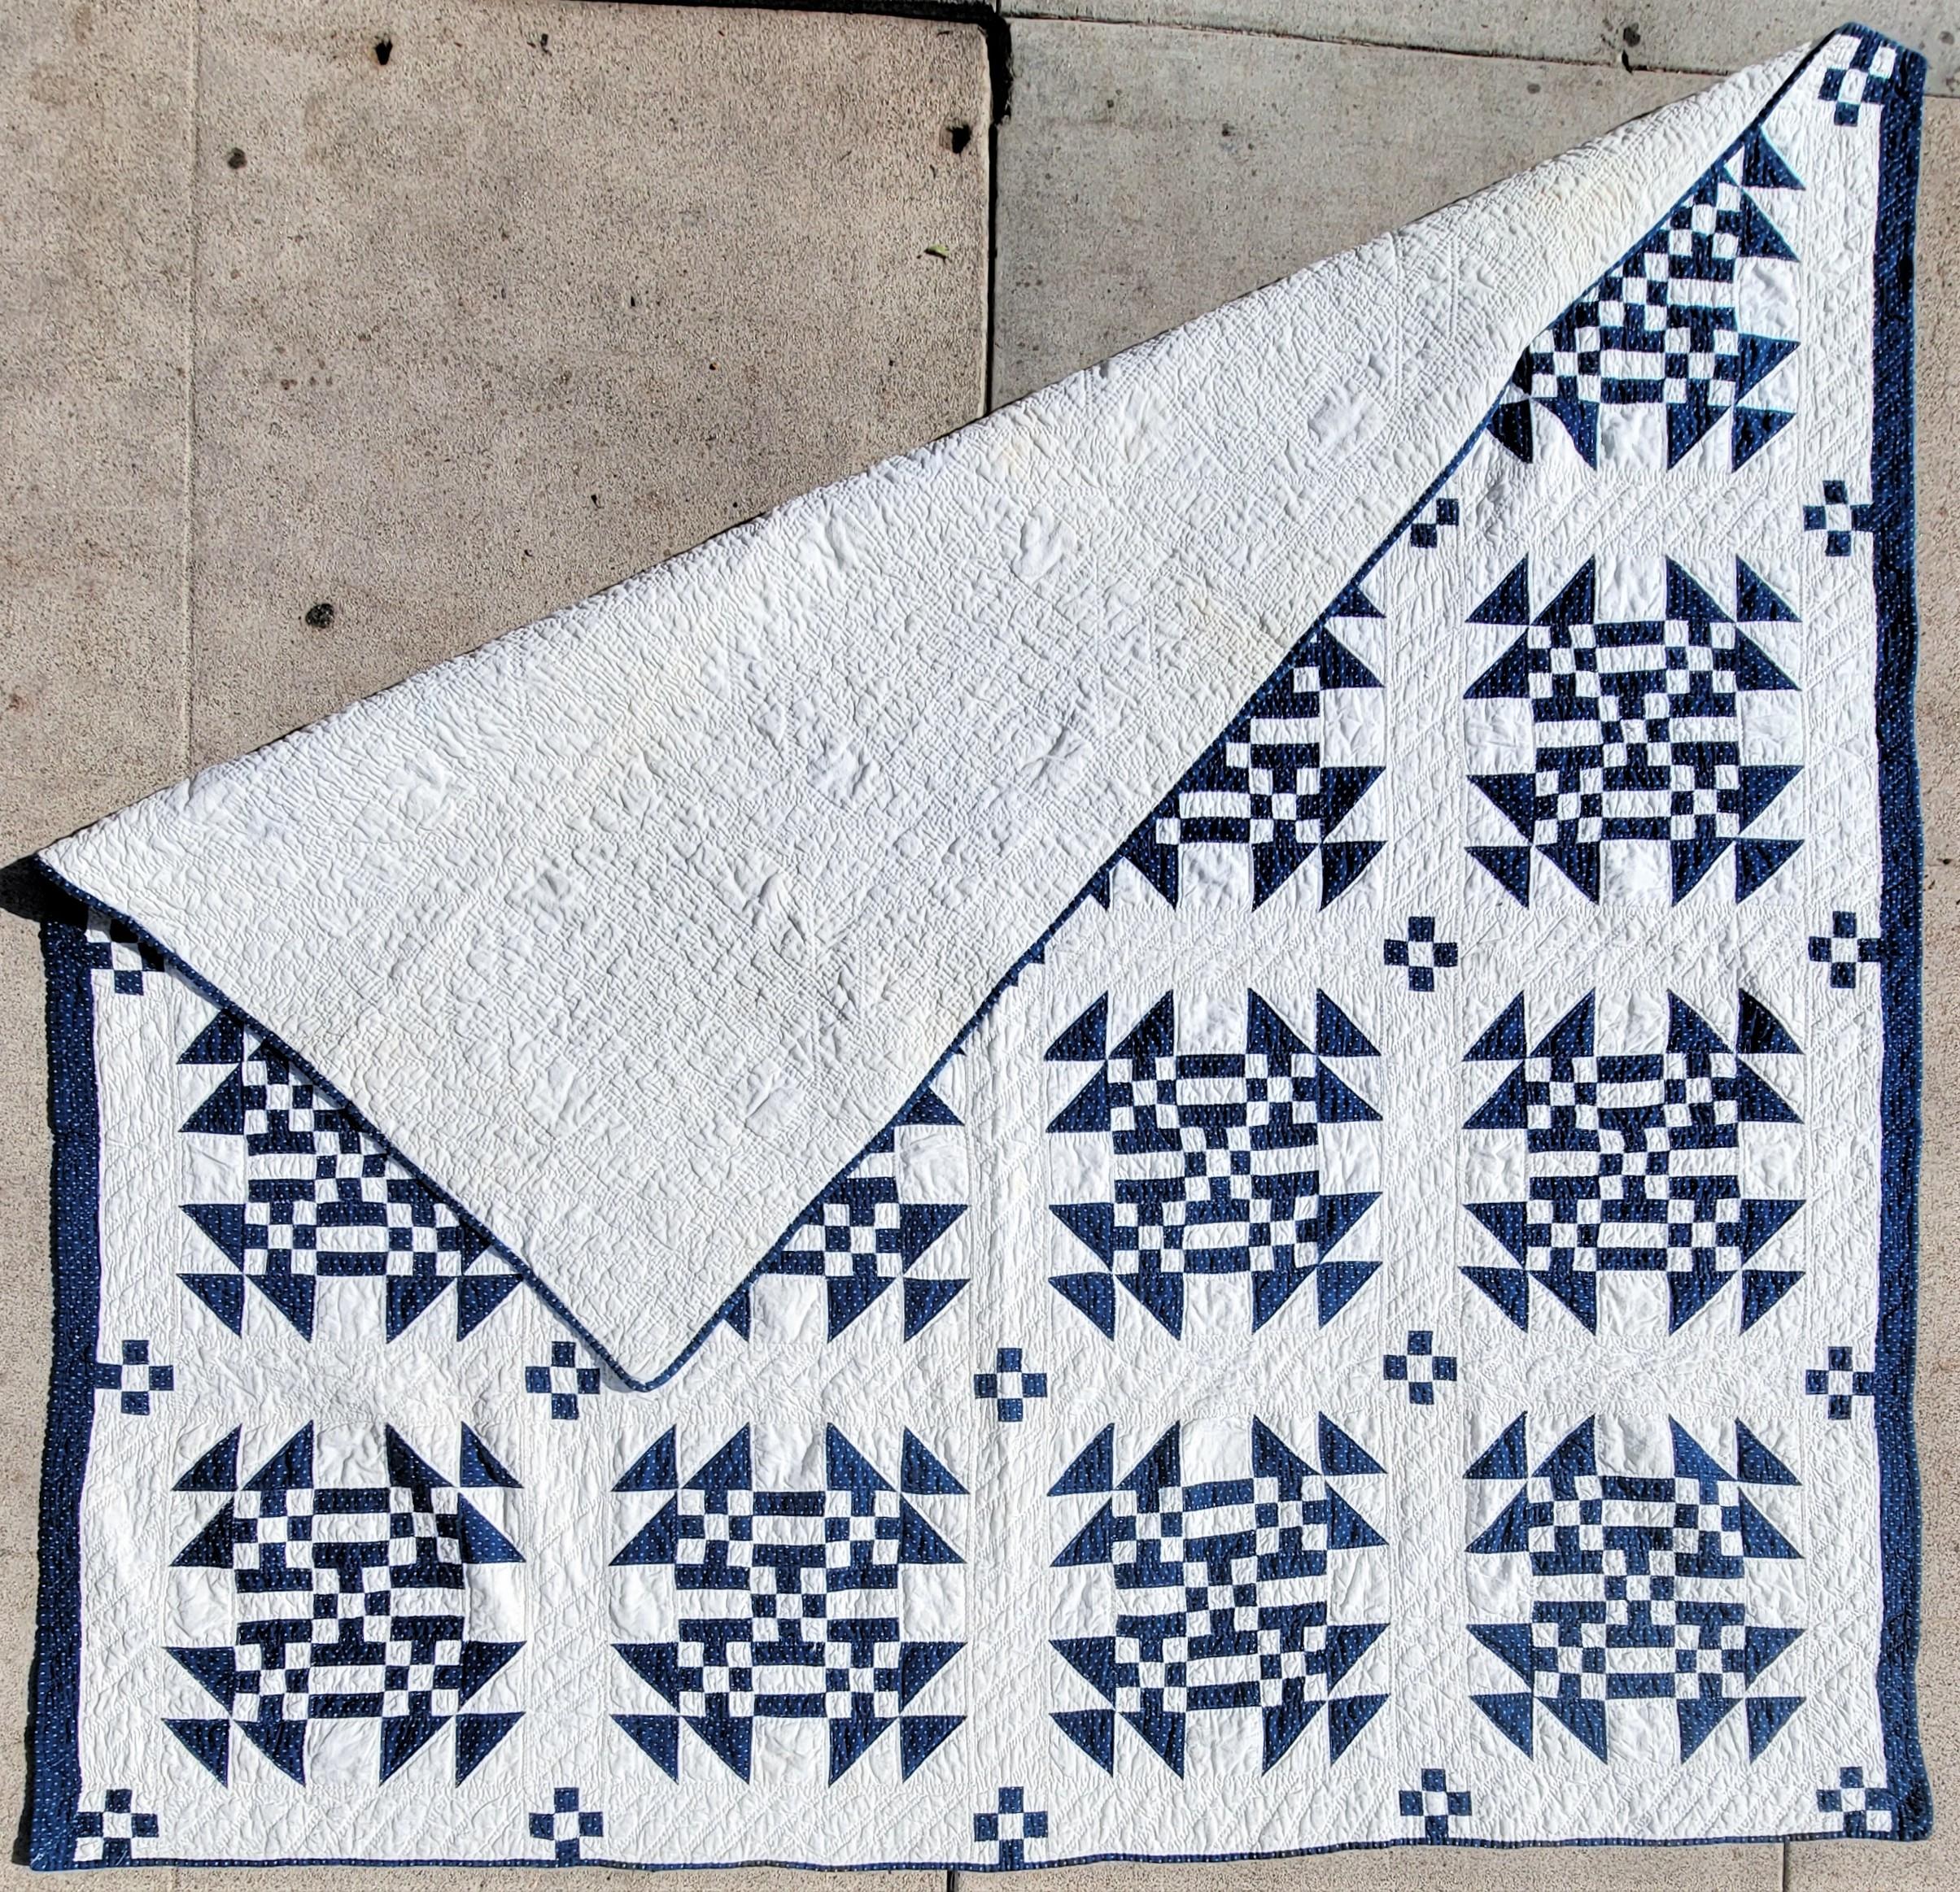 This 19thc blue & white geometric nine patch quilt is from Pennsylvania. The condition is very good.